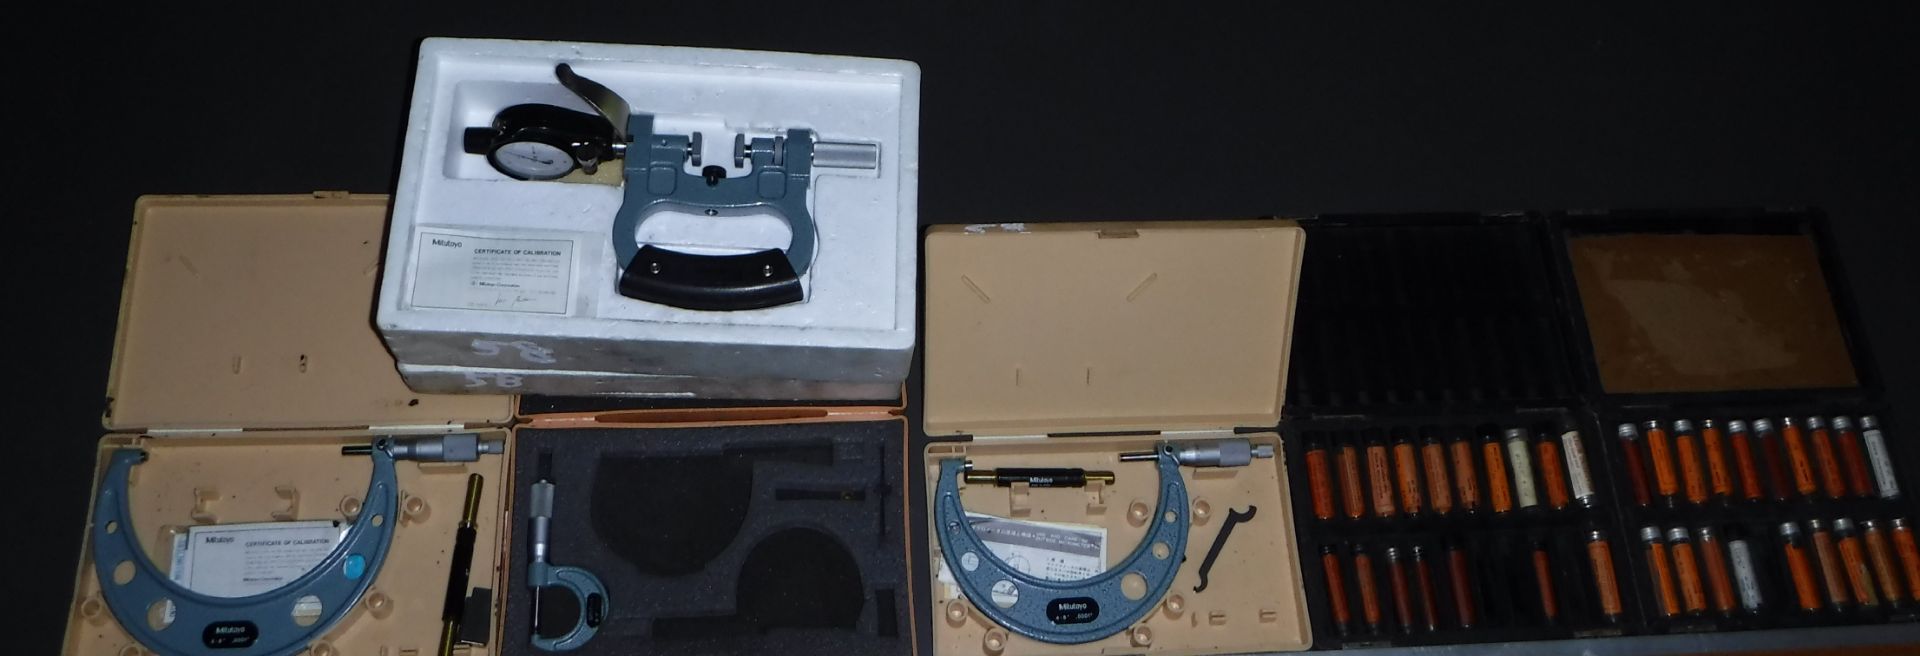 Micrometer Group with Mitutoyo Sizing Gauge